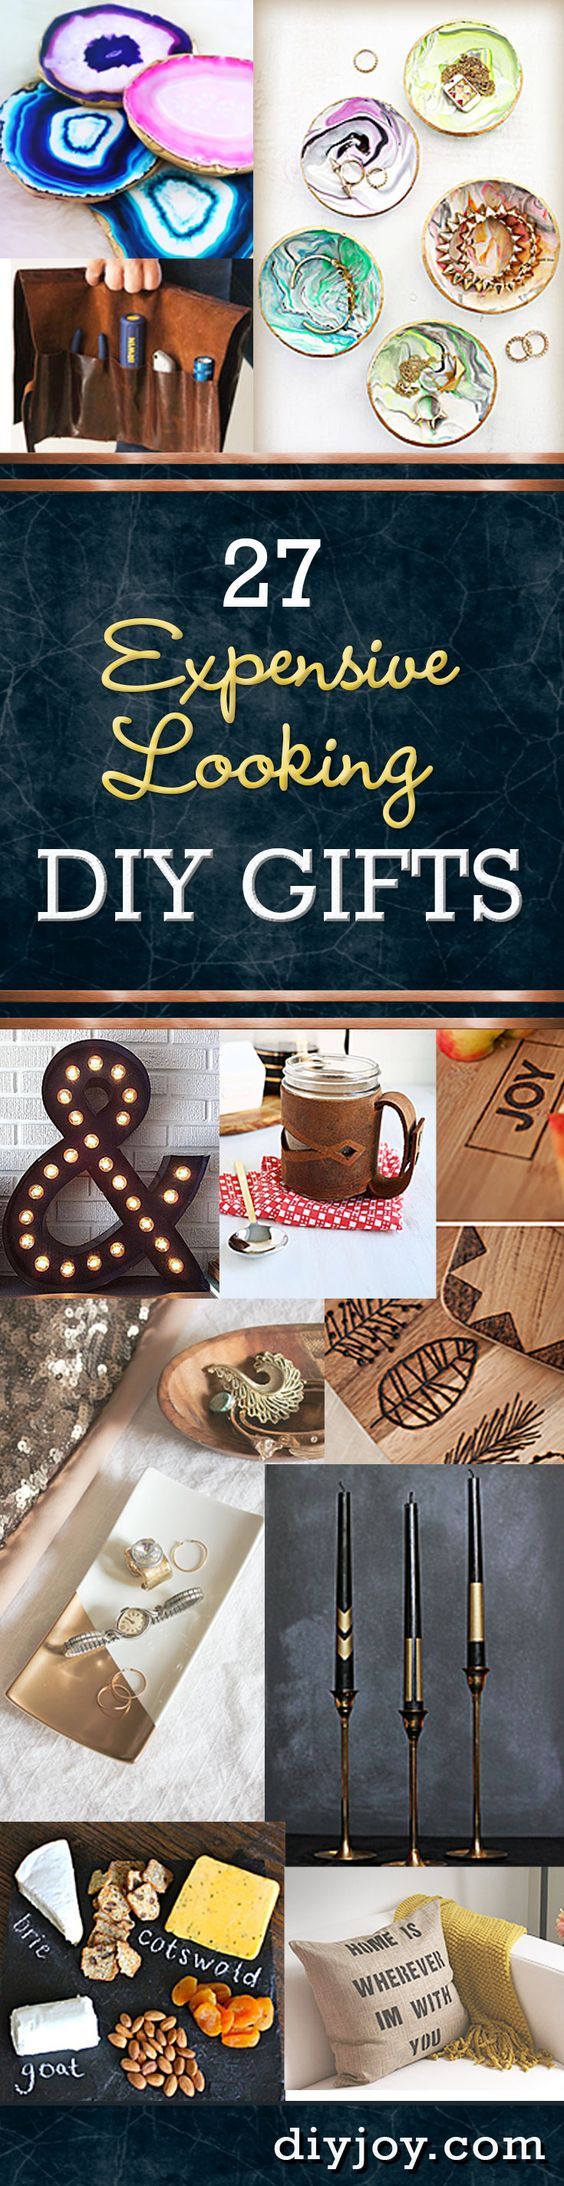 27 Expensive Looking Inexpensive DIY Gifts